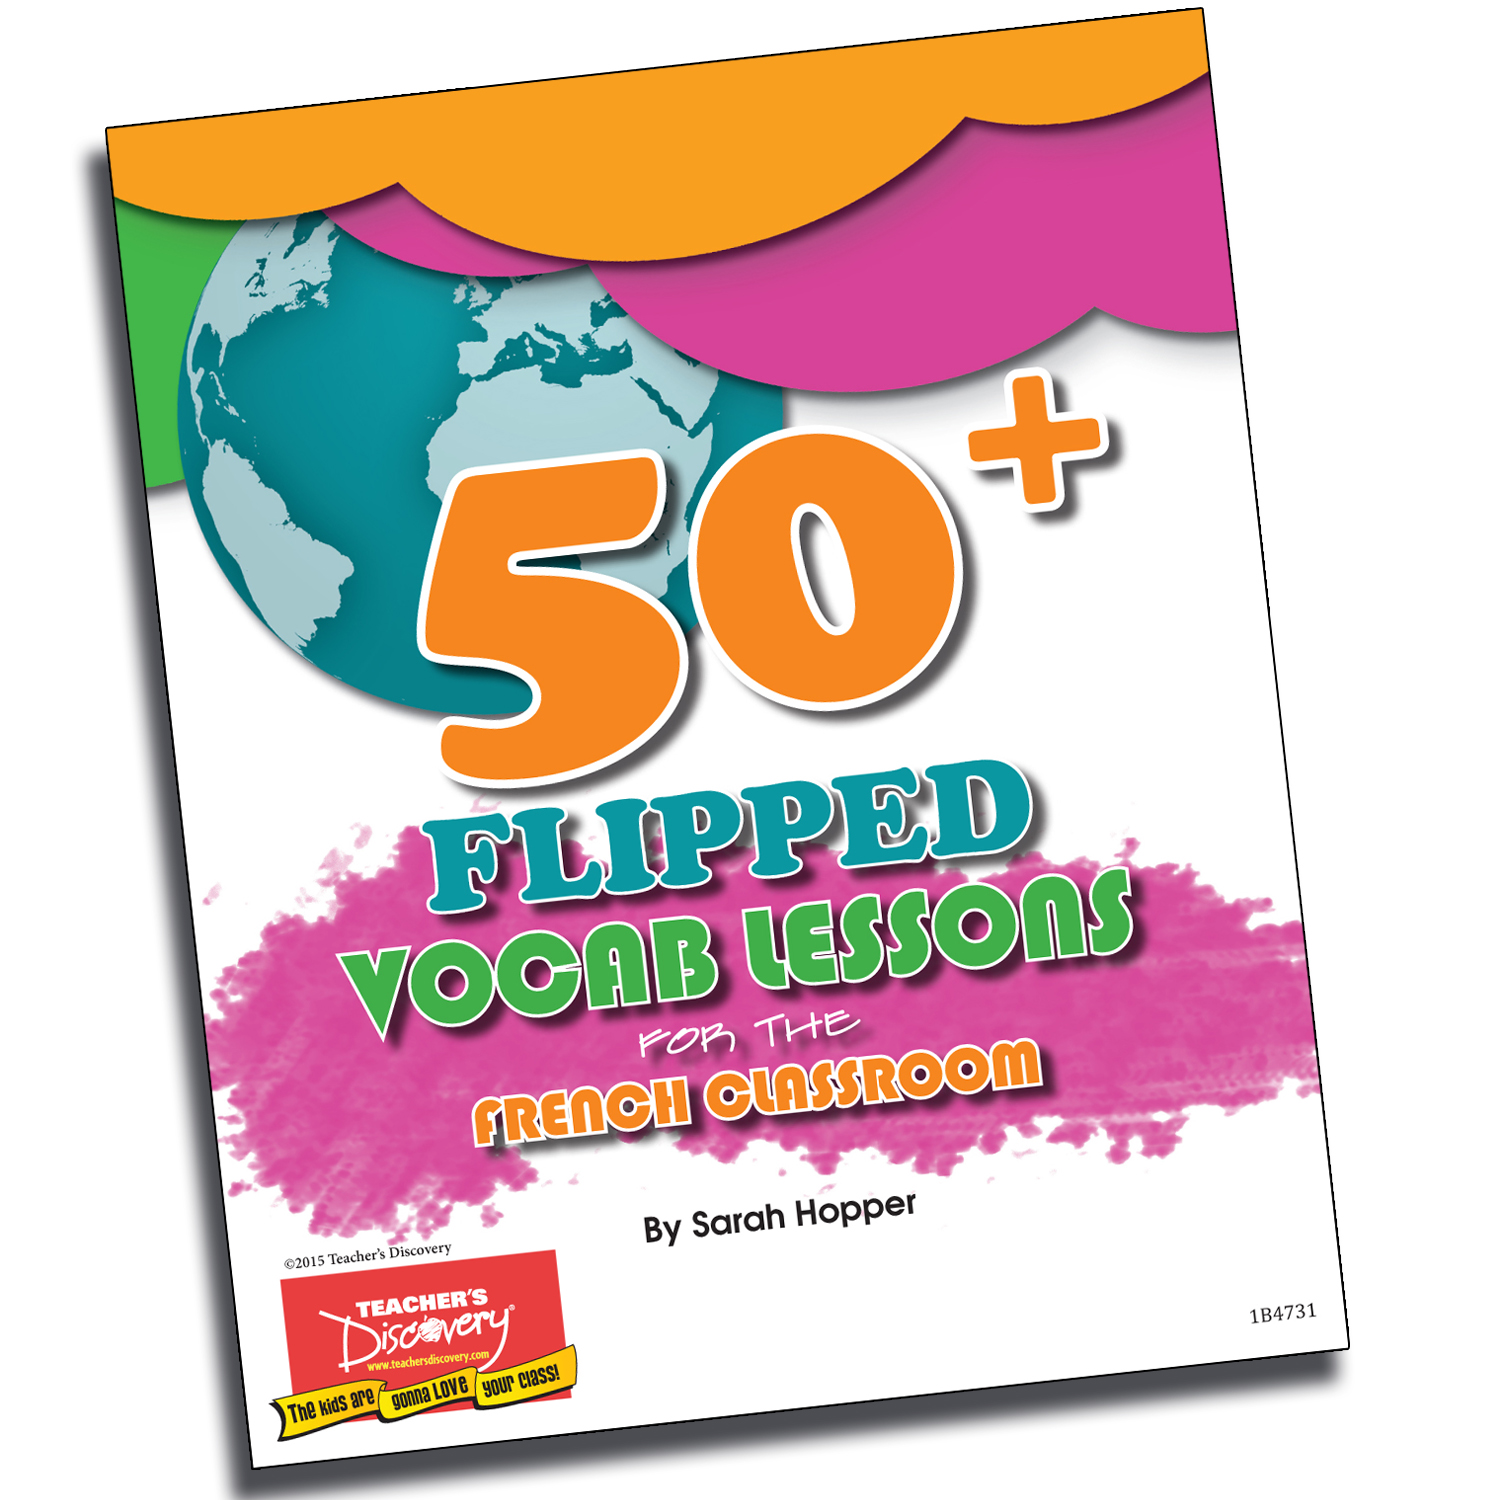 50+ Flipped Vocab Lessons for the French Classroom Book